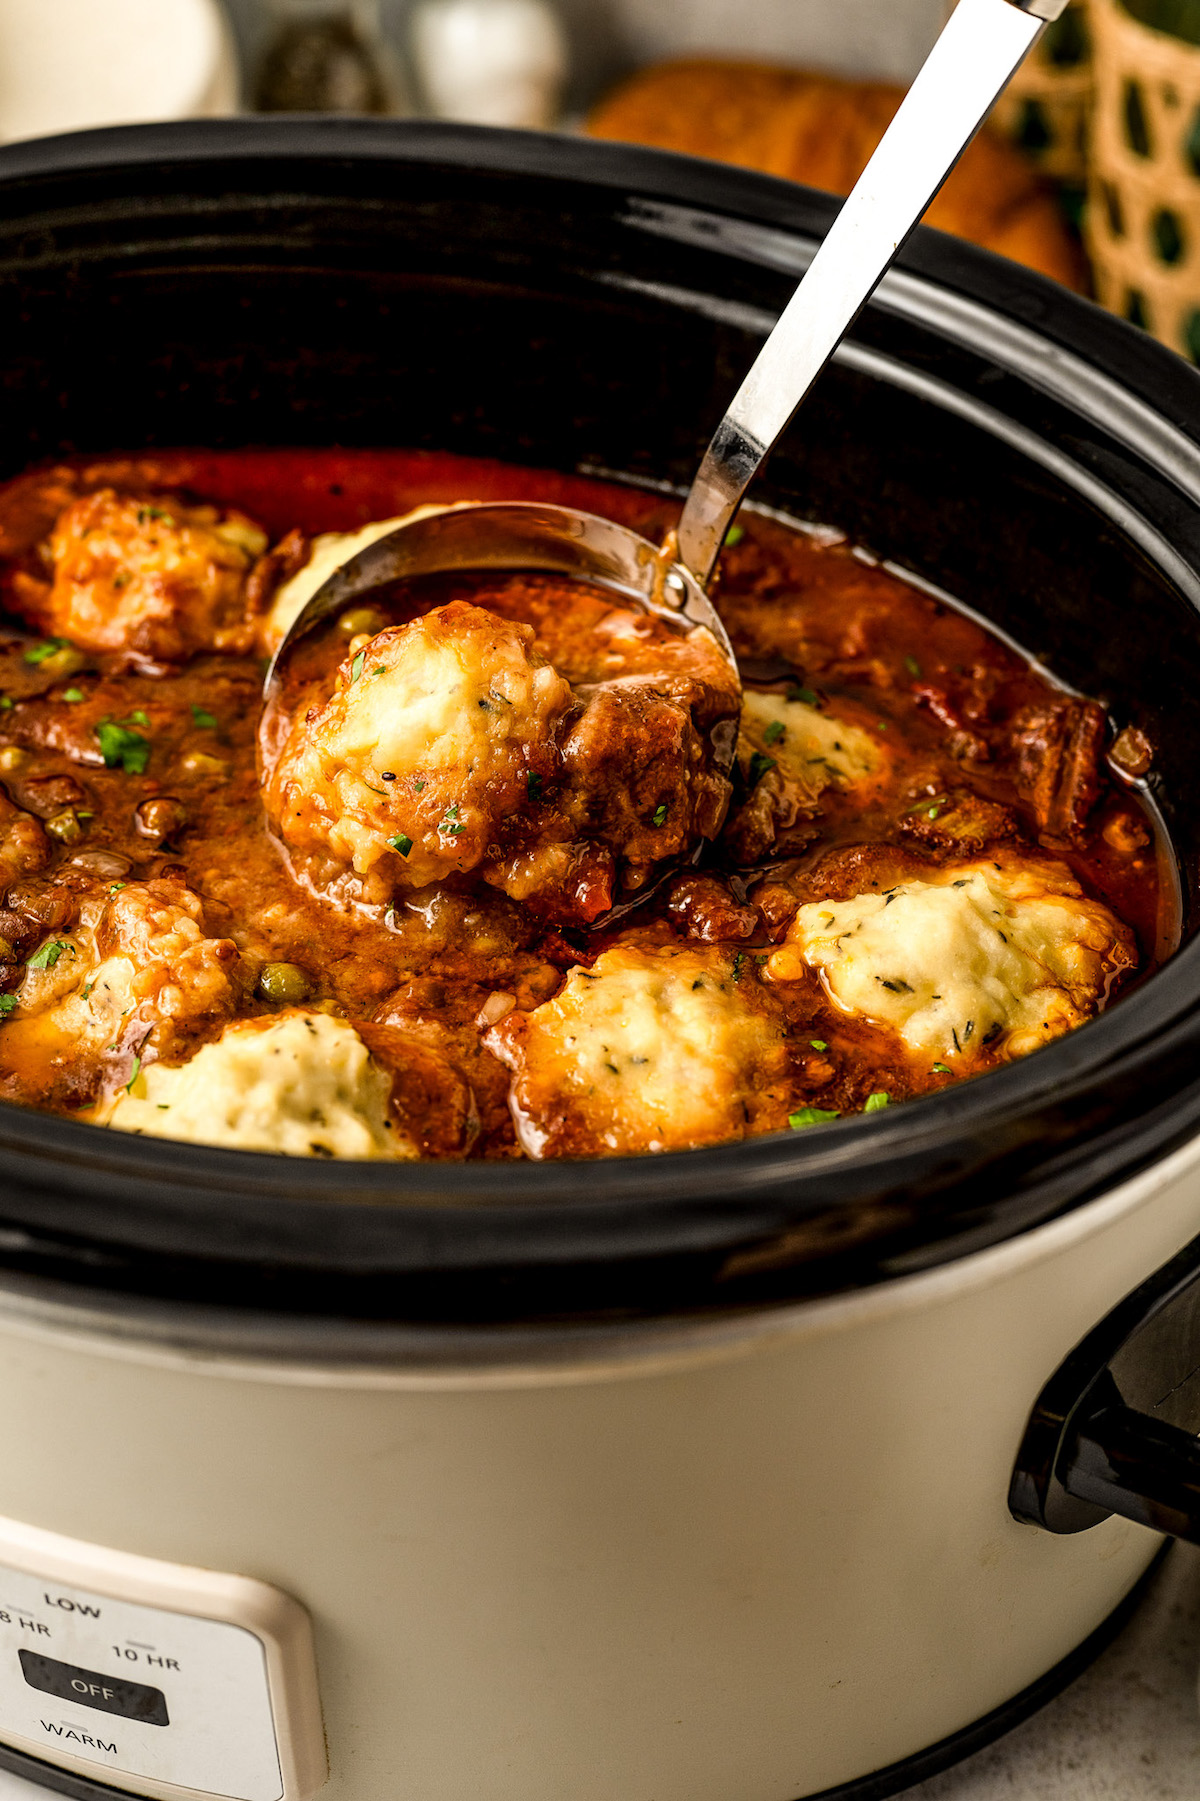 A ladle scooping out a serving of beef stew with dumplings from a crockpot.